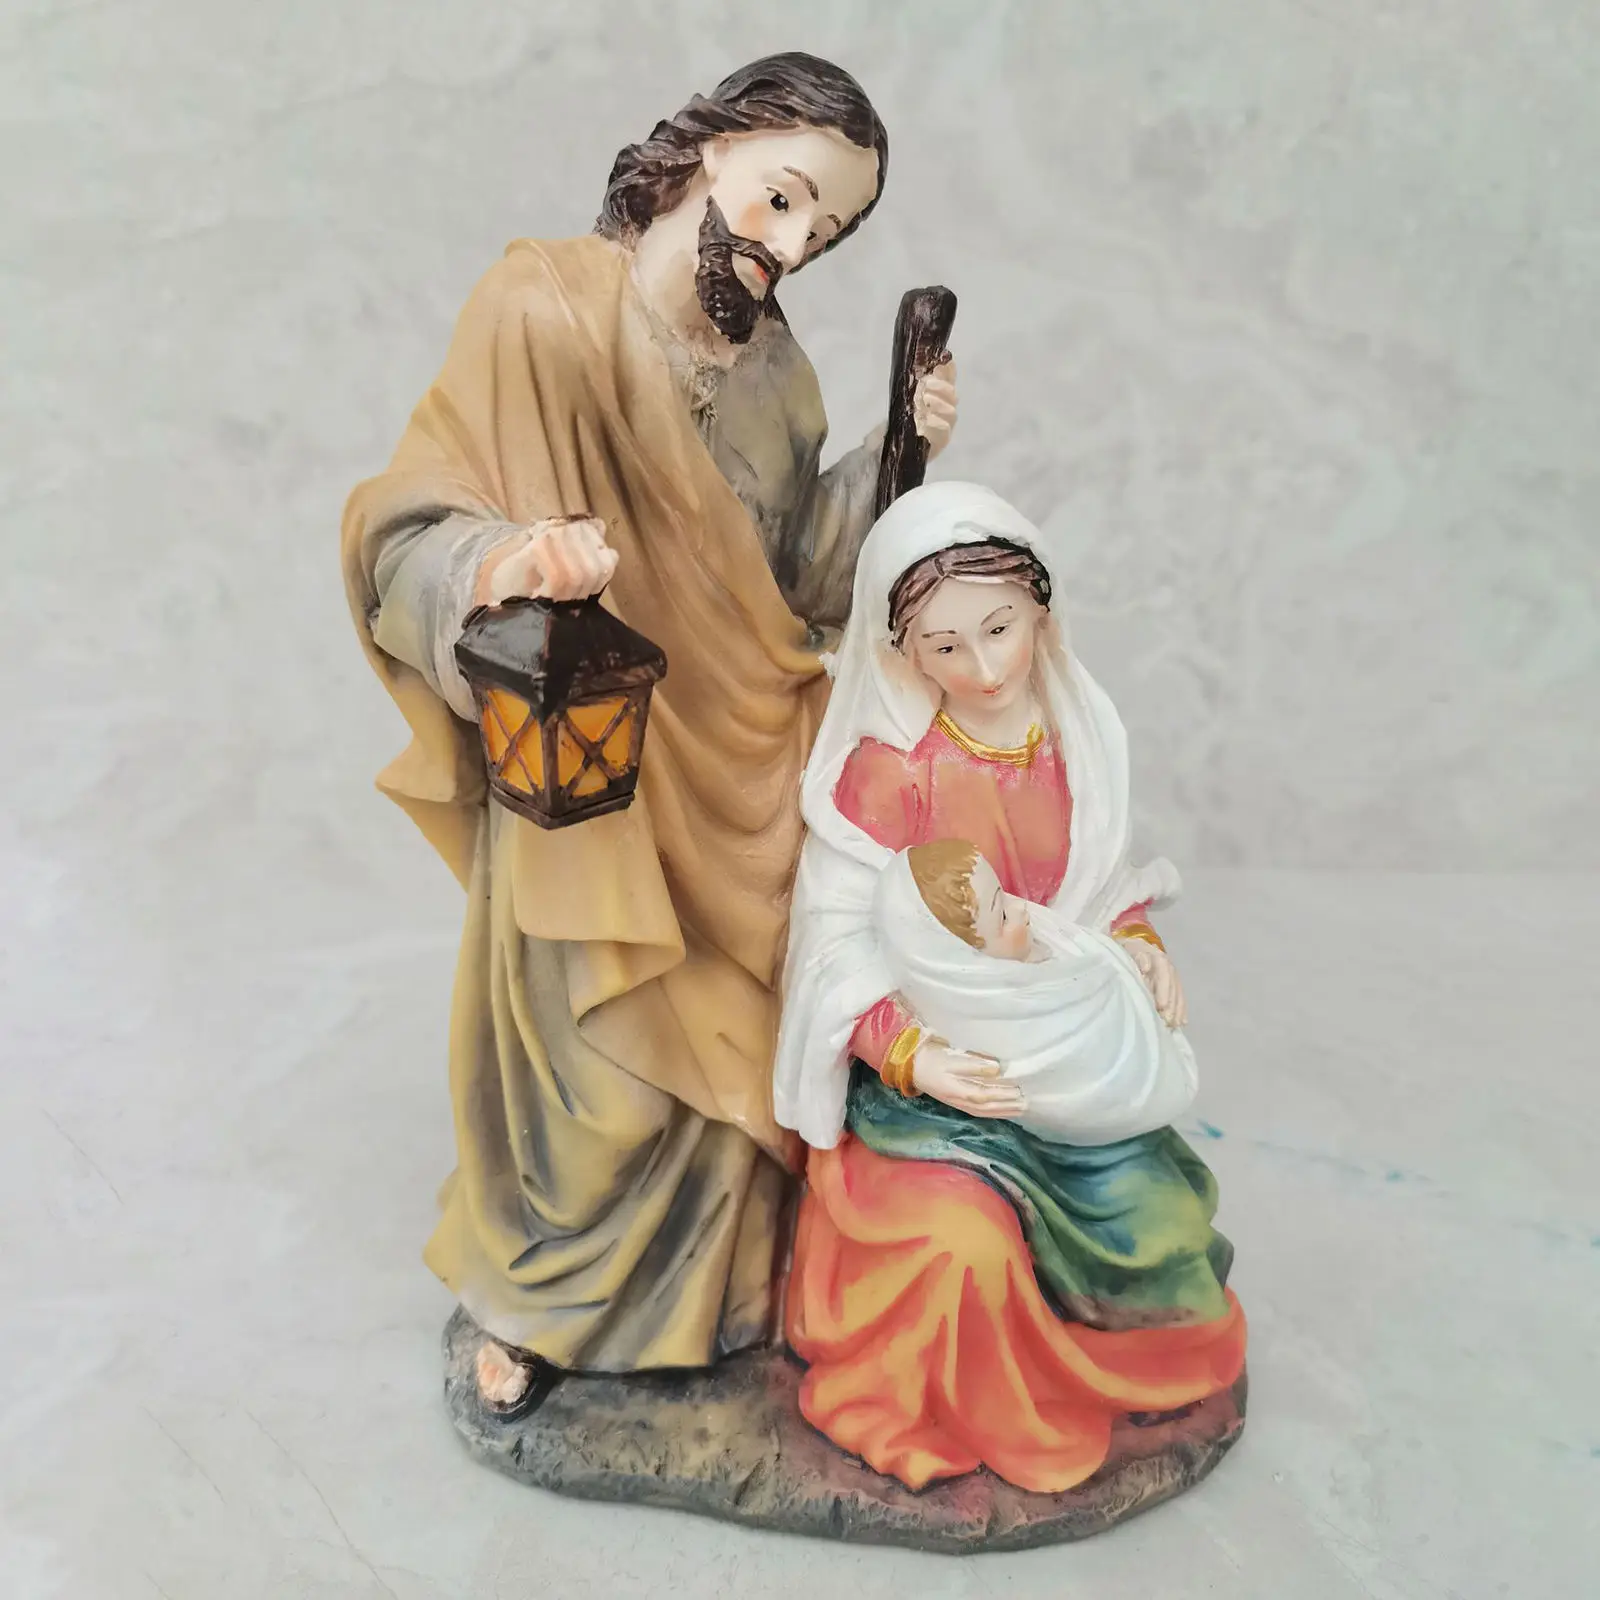 Resin Holy Family Statue Decoration Collection Ornament Art Figurine Baby Jesus Jesus Statue